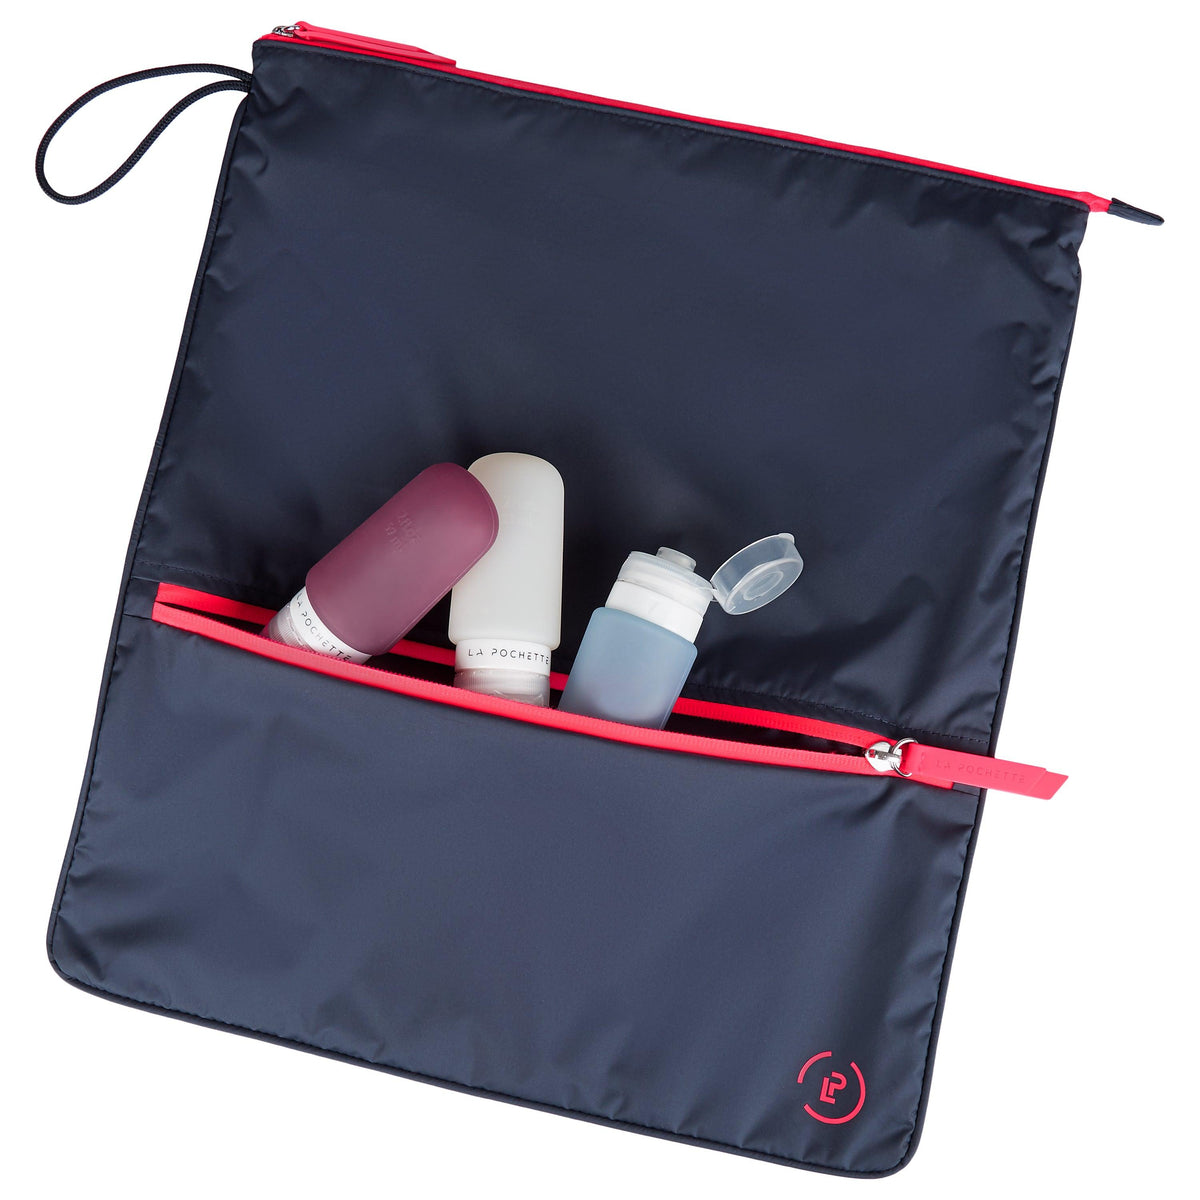 Midnight Neon Pink Sweat Bag, shown flat and with two La Pochette silicone travel bottles resting on top and in front pocket